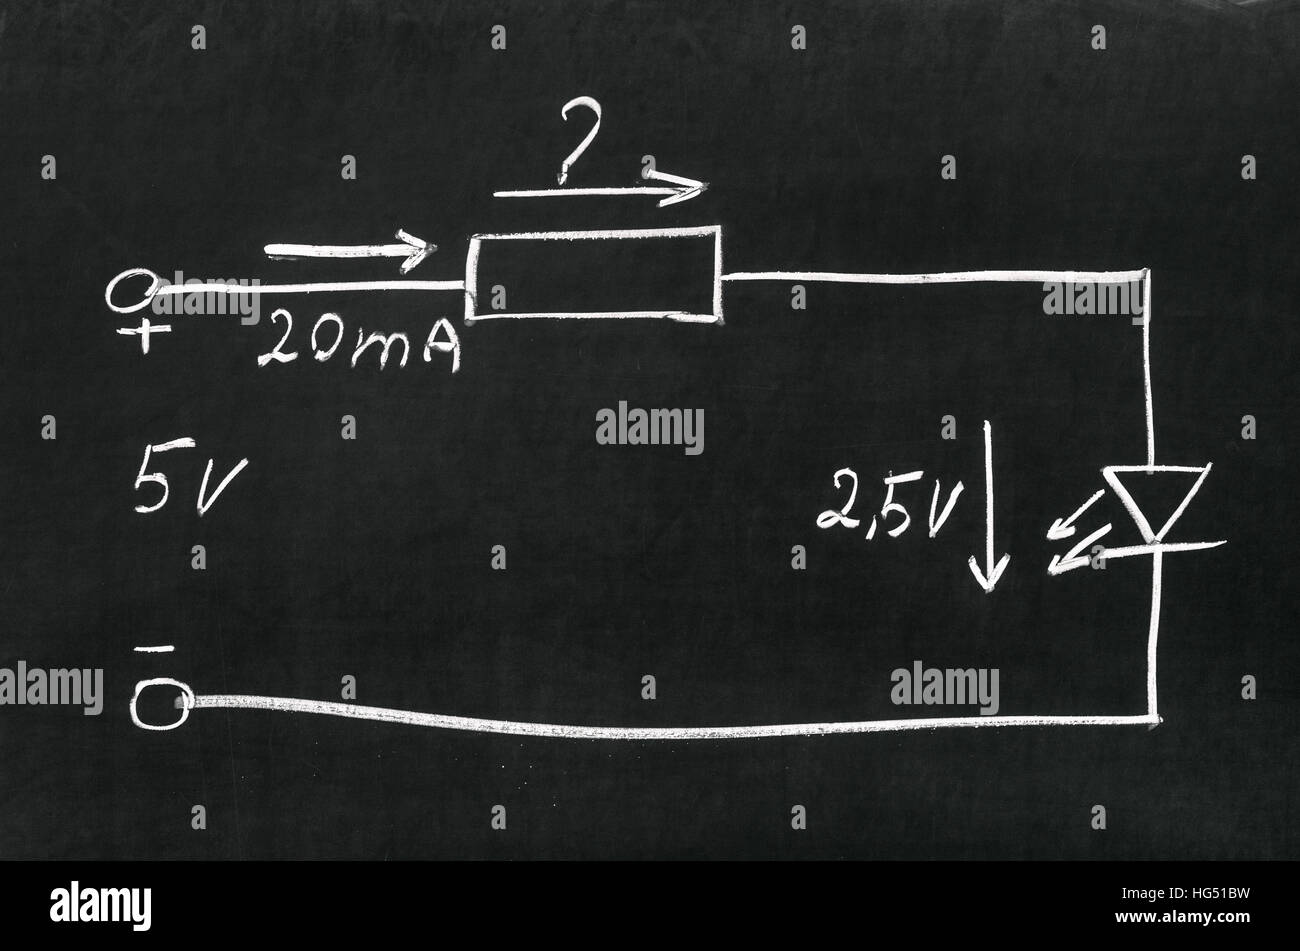 On blackboard painted with chalk electrical scheme. Calculate the resistor. Stock Photo